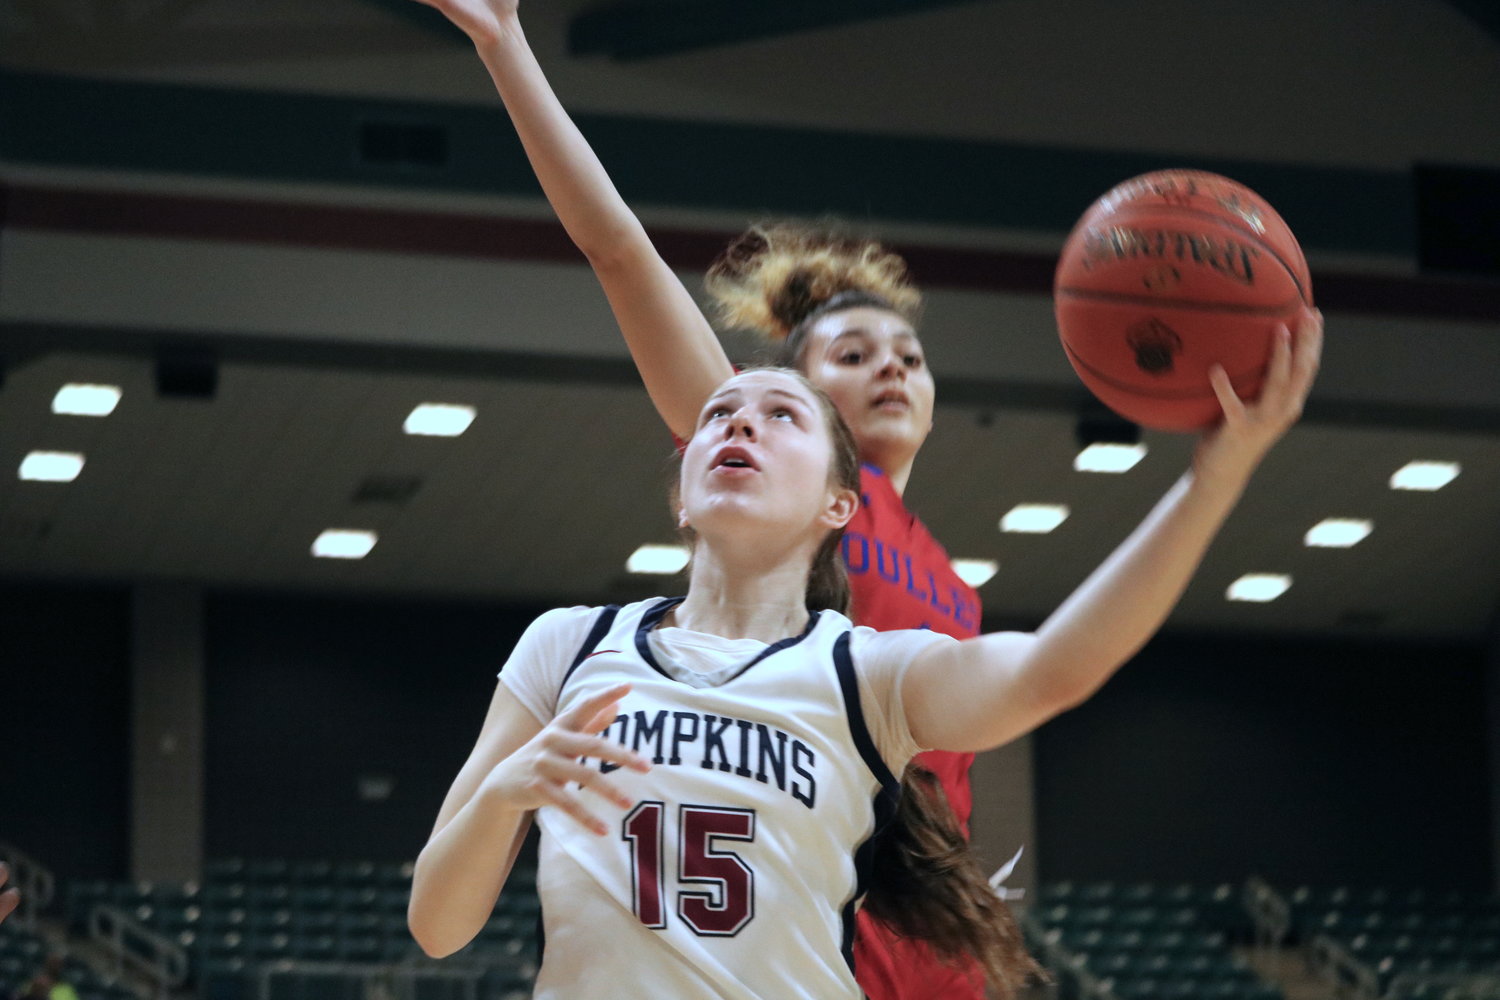 Tompkins’ Emma Potts shoots a layup during Tuesday’s Class 6A regional quarterfinal against Fort Bend Dulles at the Merrell Center.